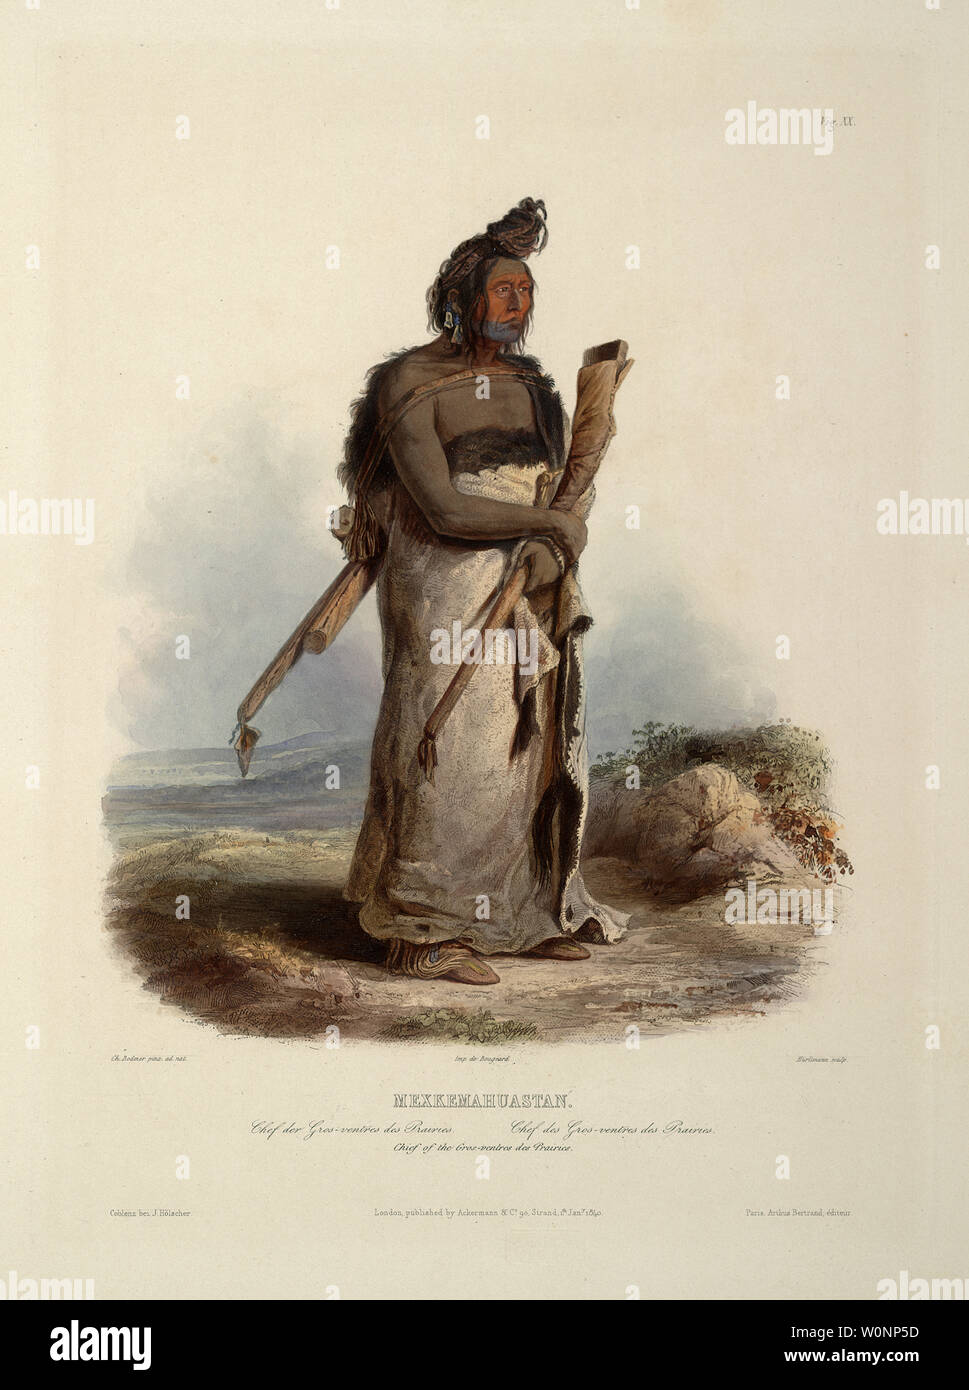 Mexkemahuastan, Chief of the Gros-ventres des Prairies - Karl Bodmer aquatint from Travels in the Interior of North America (Voyage dans l’intérieur) Stock Photo